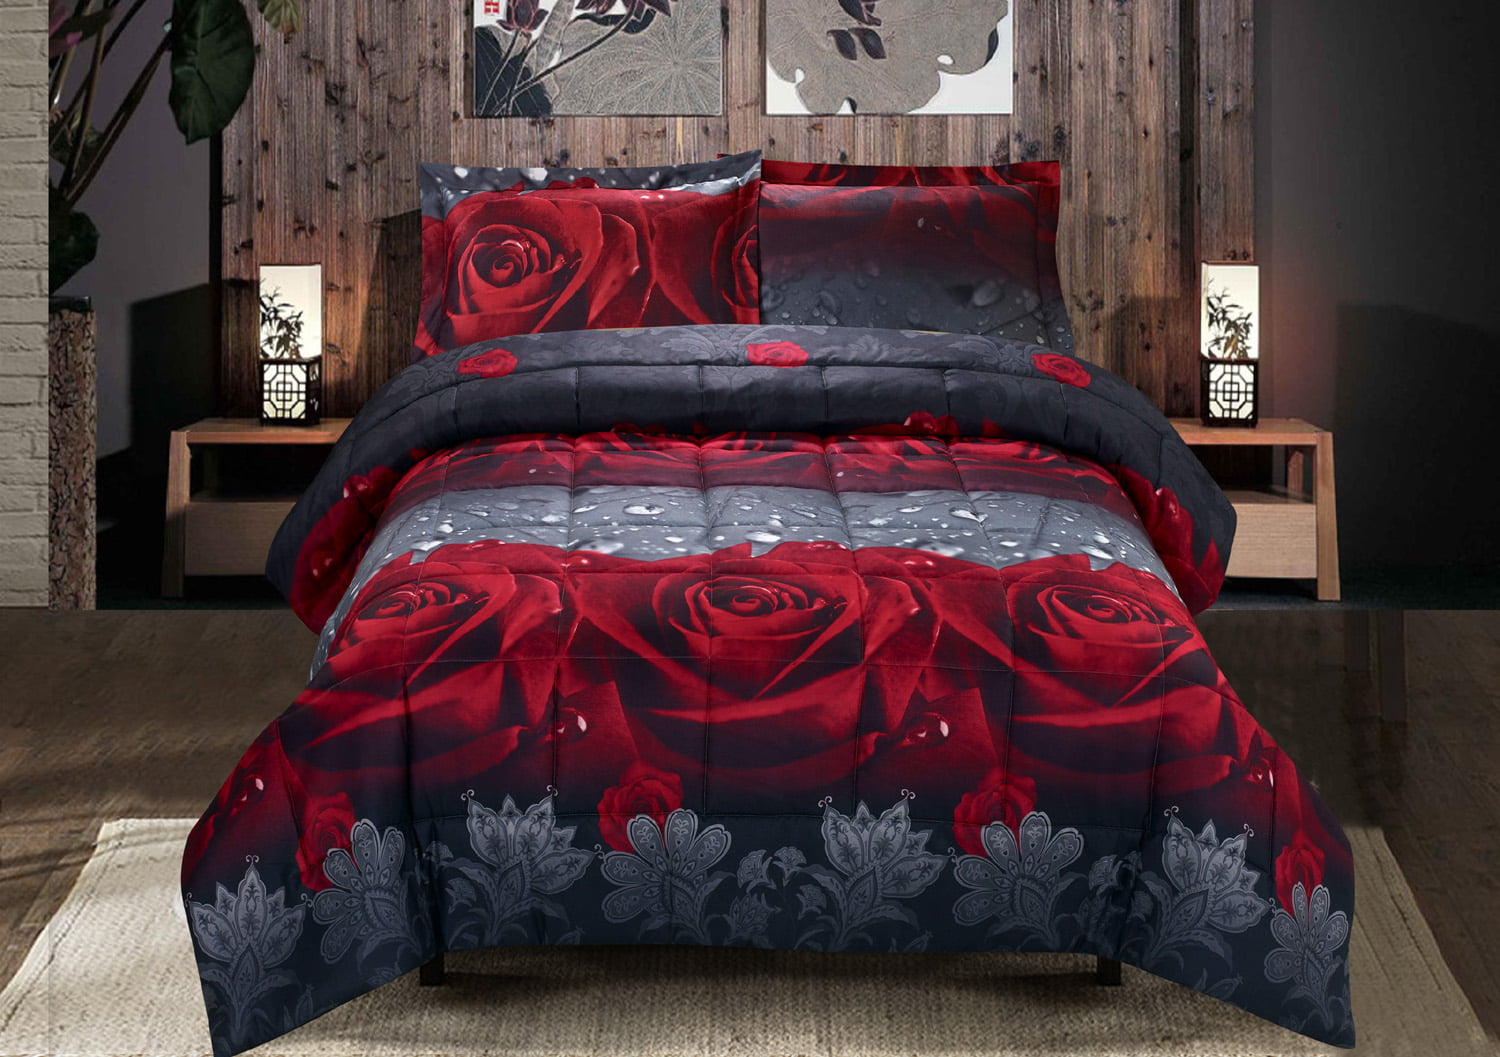 BRHF Black and Red Rose Comforter Set Queen Size, 3 Piece Romantic ...